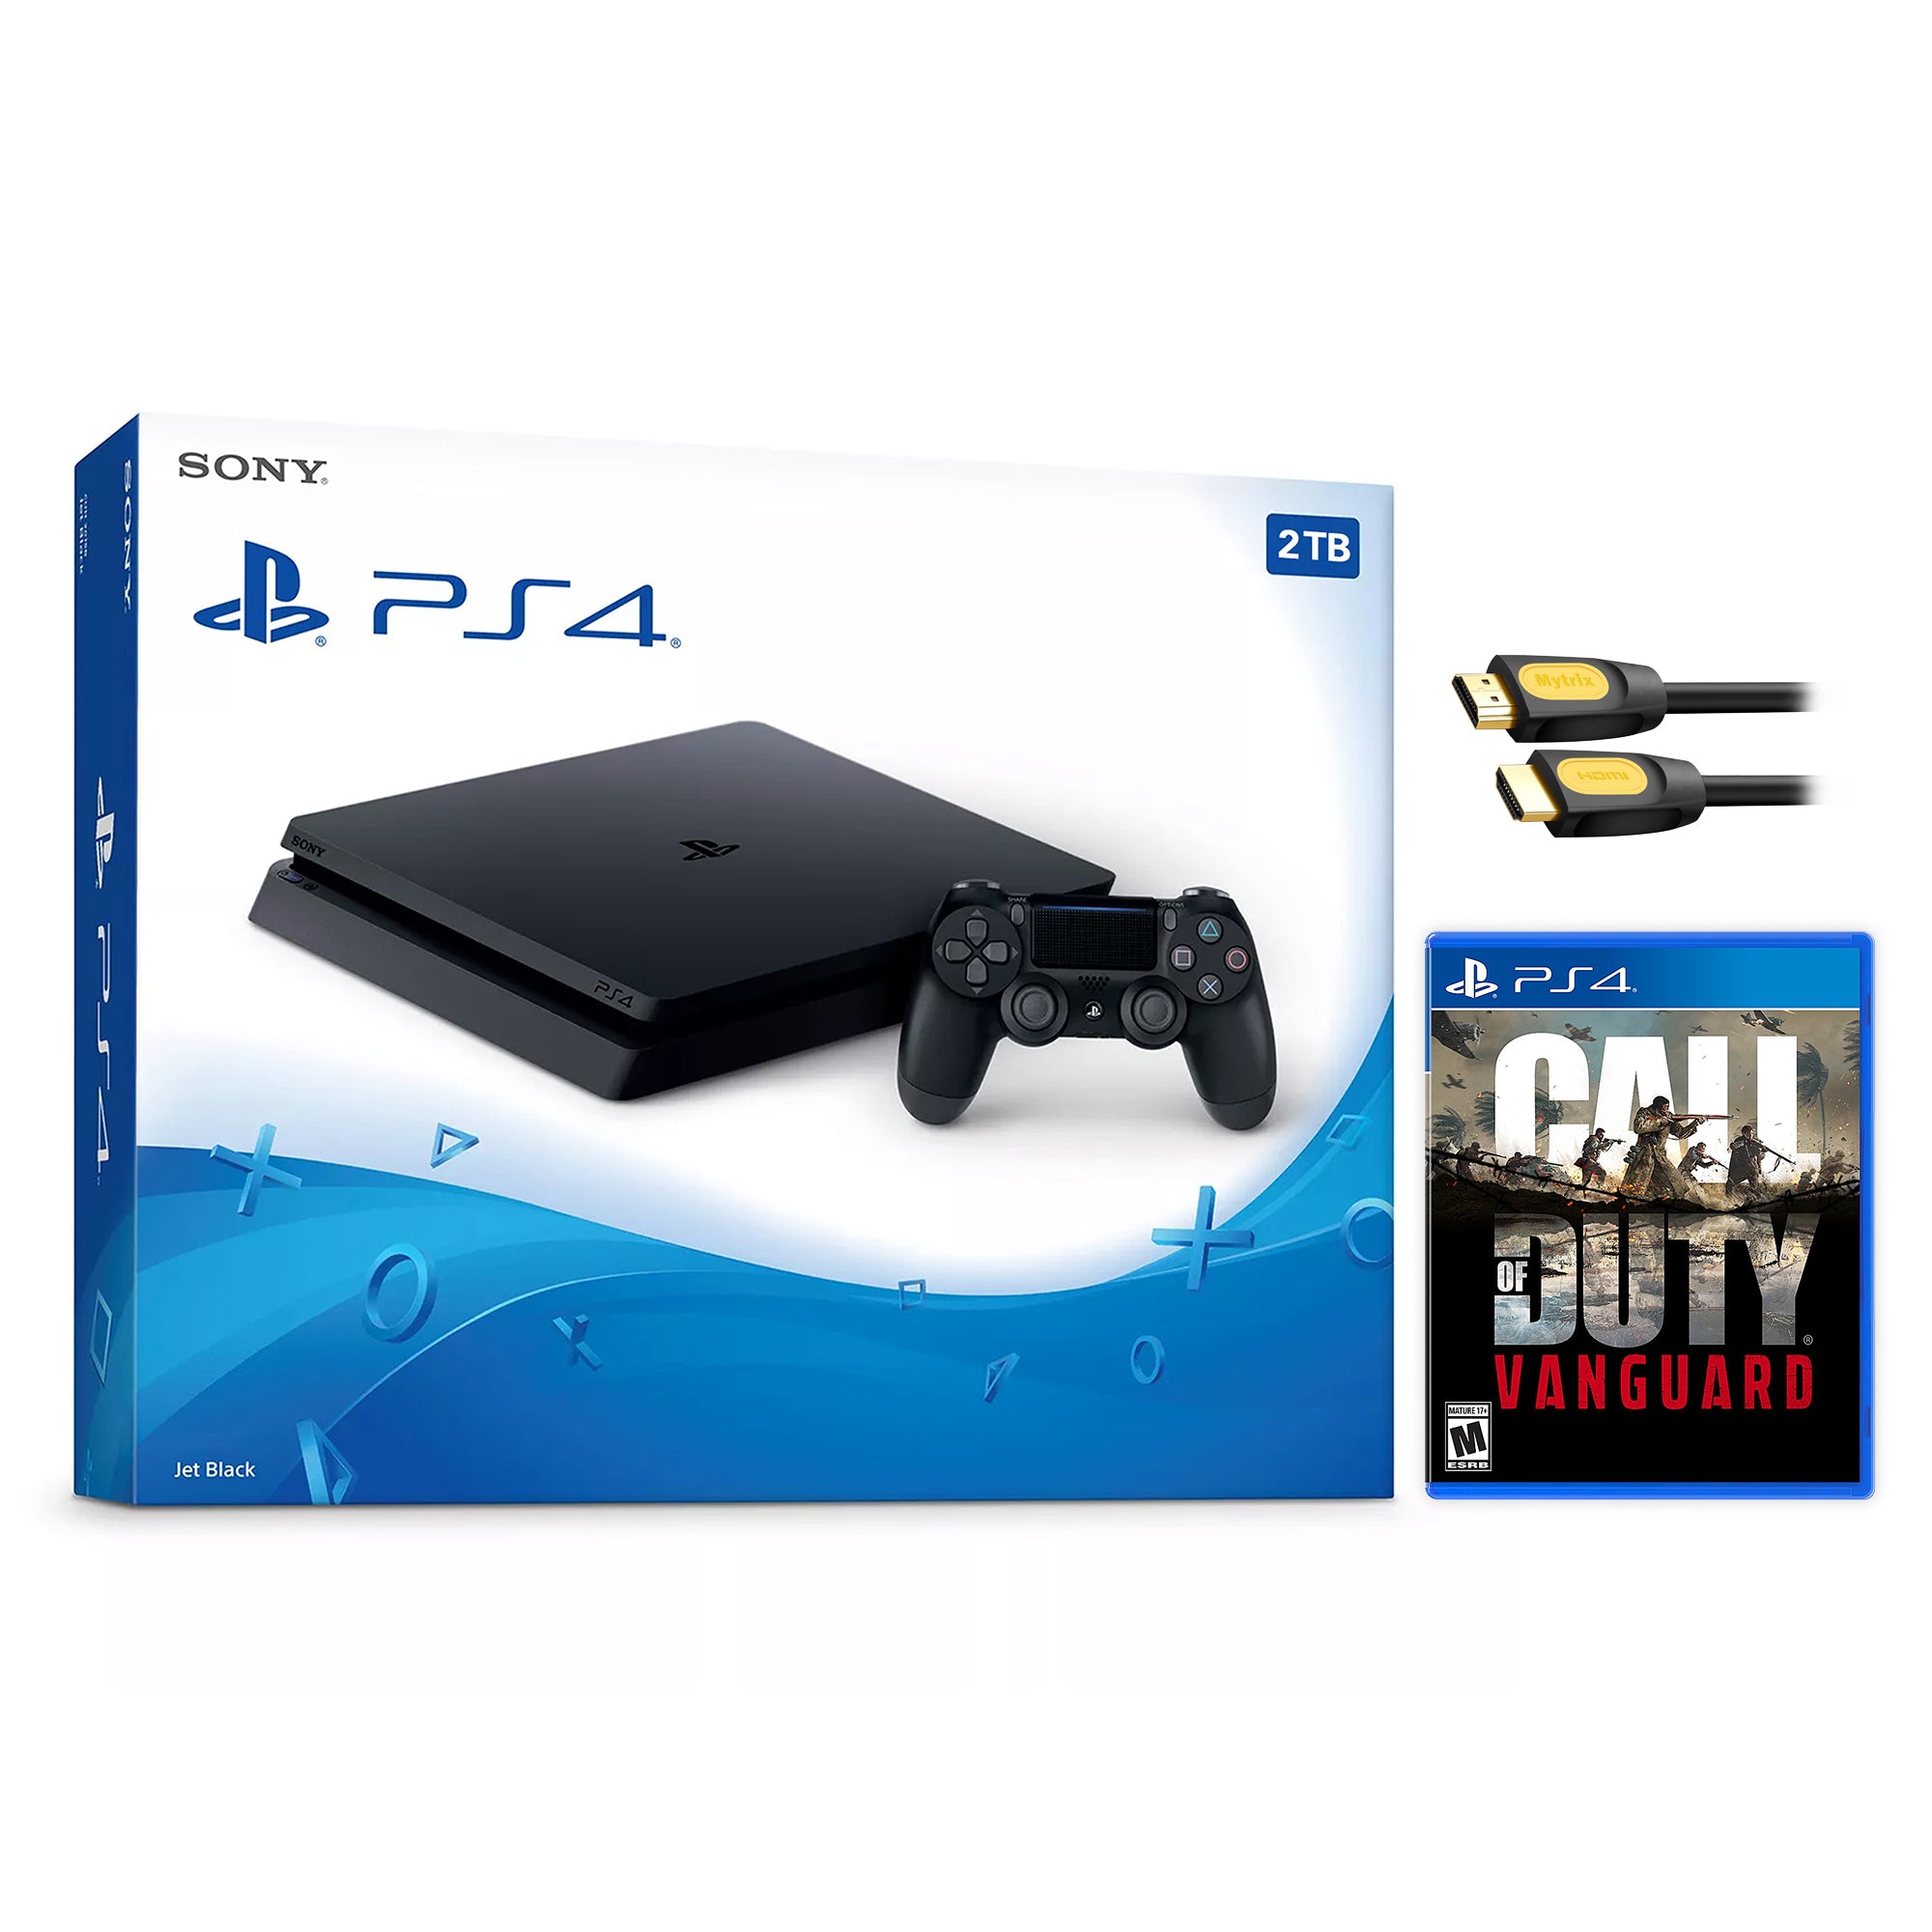 Sony PlayStation 4 Slim The Last of Us: Remastered Bundle Upgrade 2TB HDD PS4 Gaming Console, Jet Black, with Mytrix High Speed HDMI - Large Capacity Internal Hard Drive Enhanced PS4 Console